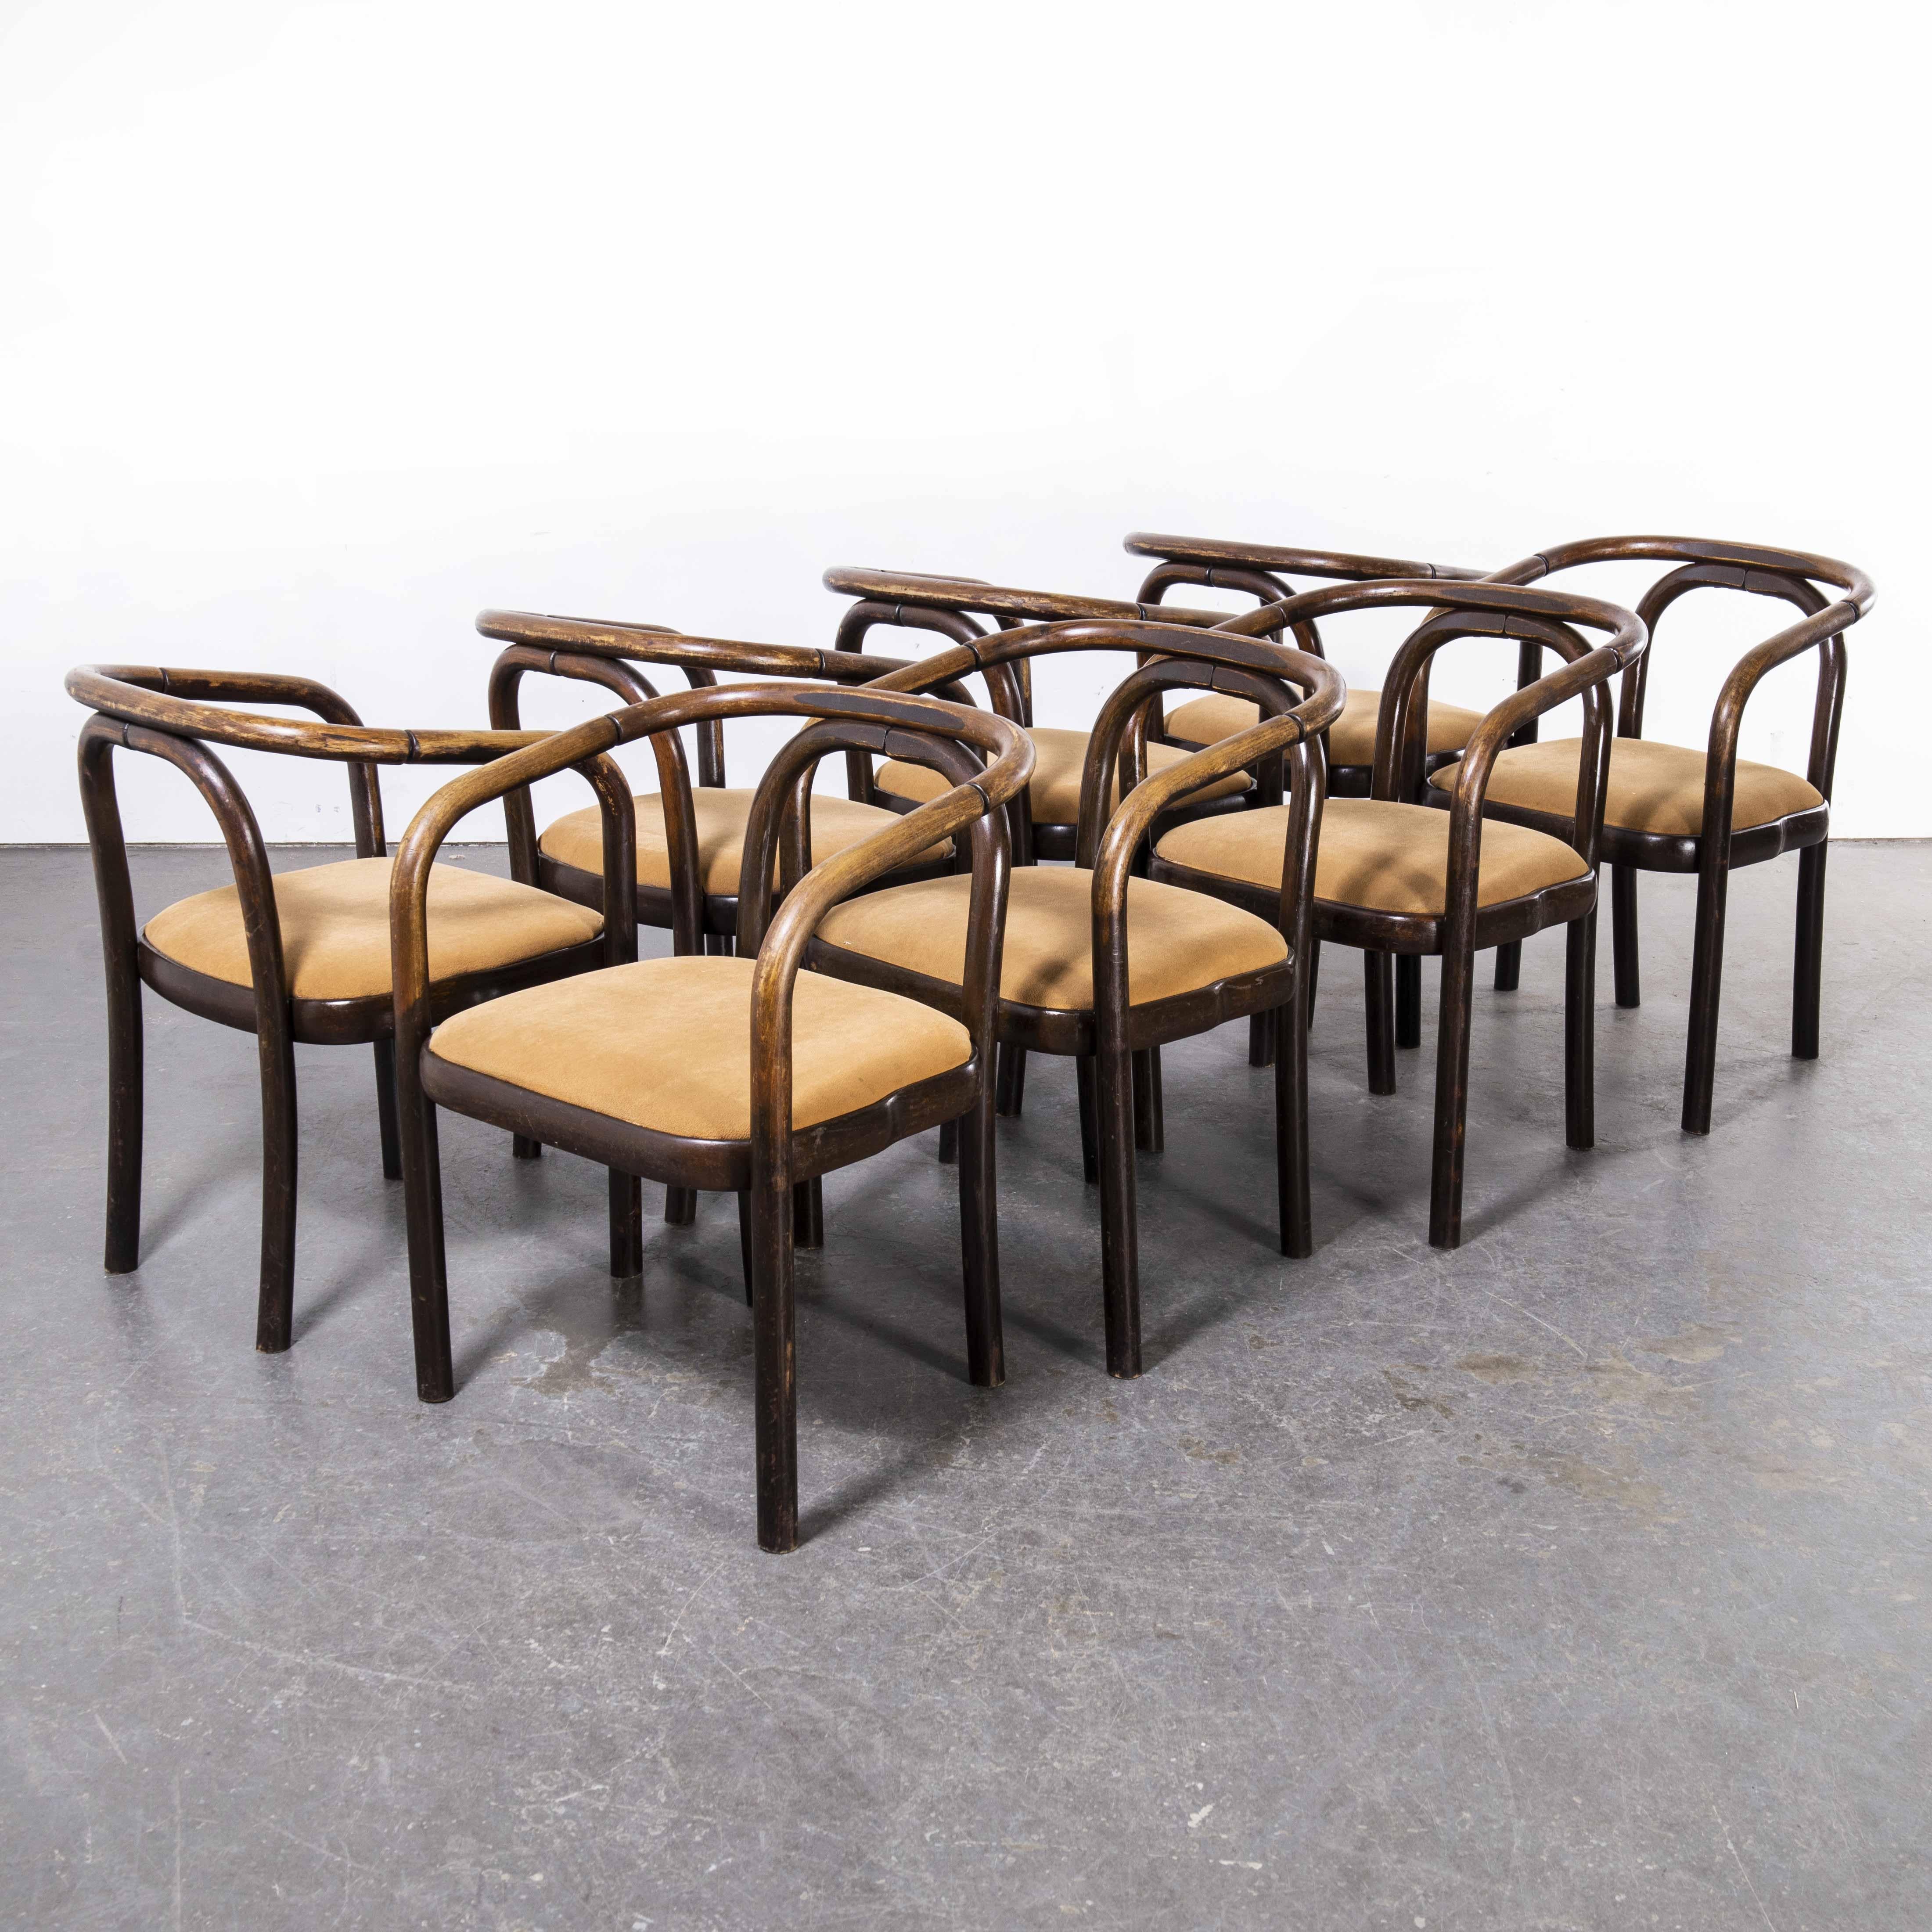 1960’s Armchairs by Antonin Suman For Ton – set of eight
1960’s Armchairs by Antonin Suman For Ton – set of eight. Antonin Suman joined Thonet in 1949 and later moved to the Thonet offshoot Ton when the firms split during the post-war political